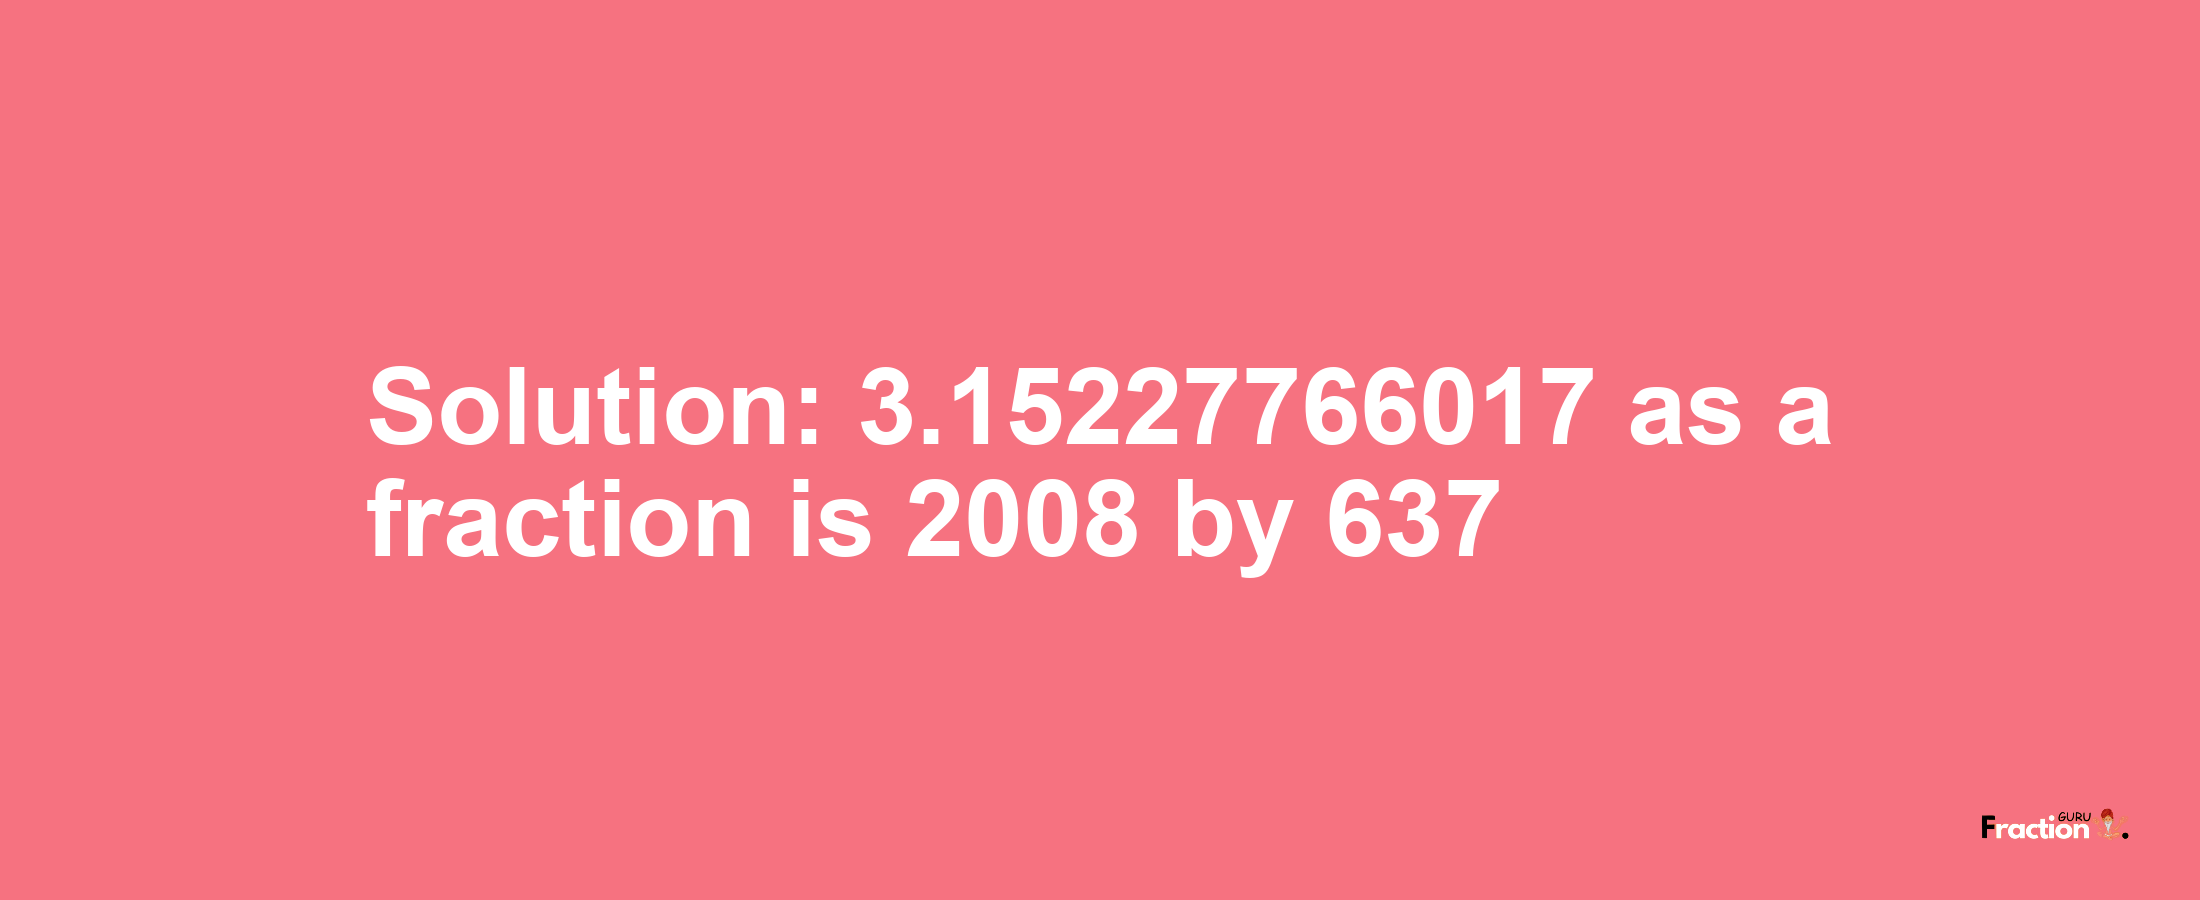 Solution:3.15227766017 as a fraction is 2008/637